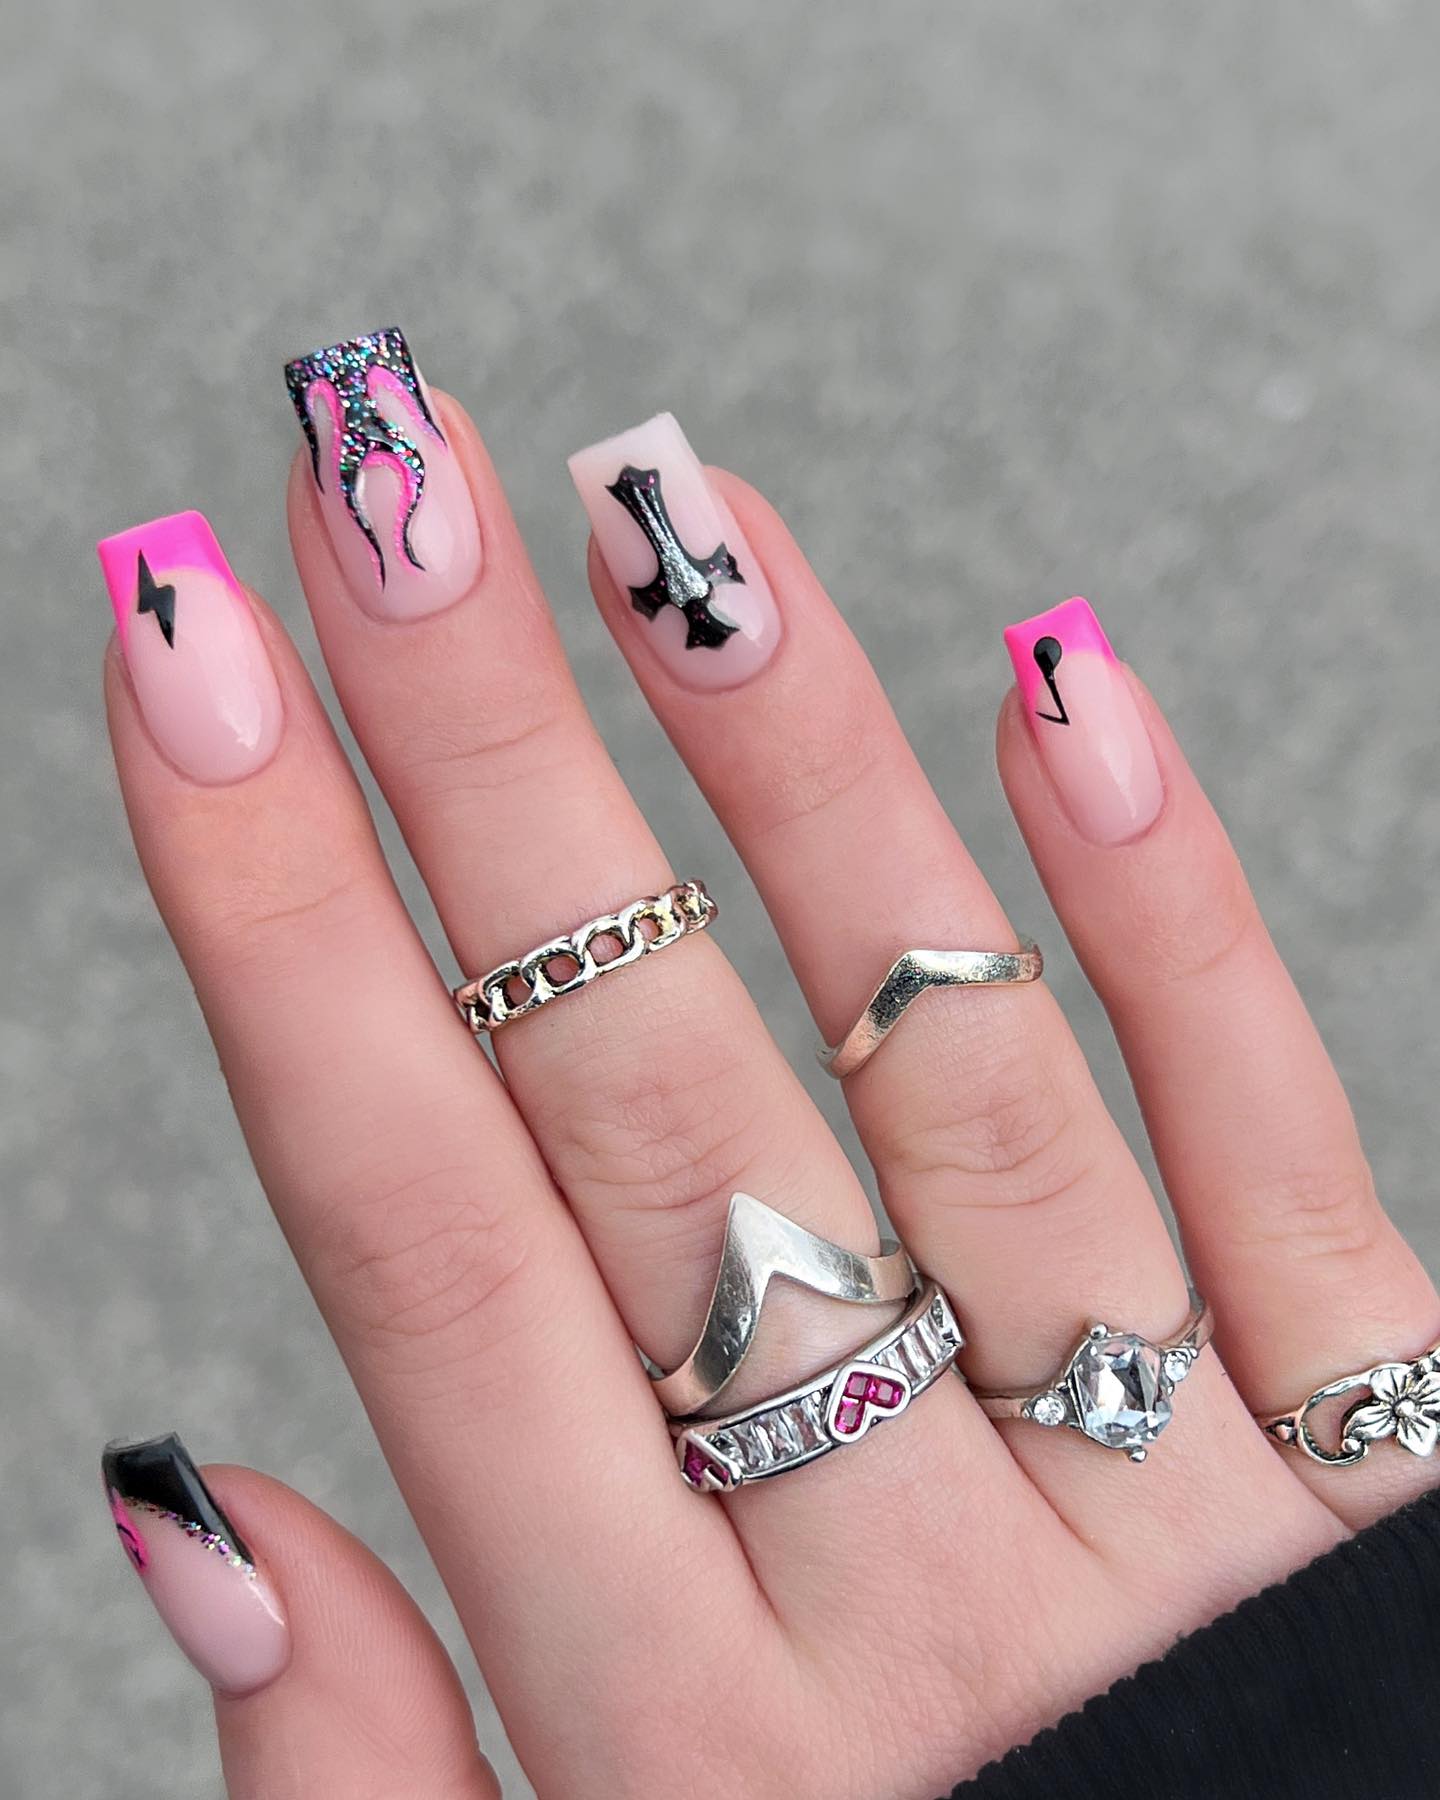 100+ Short Nail Designs You’ll Want To Try This Year images 52